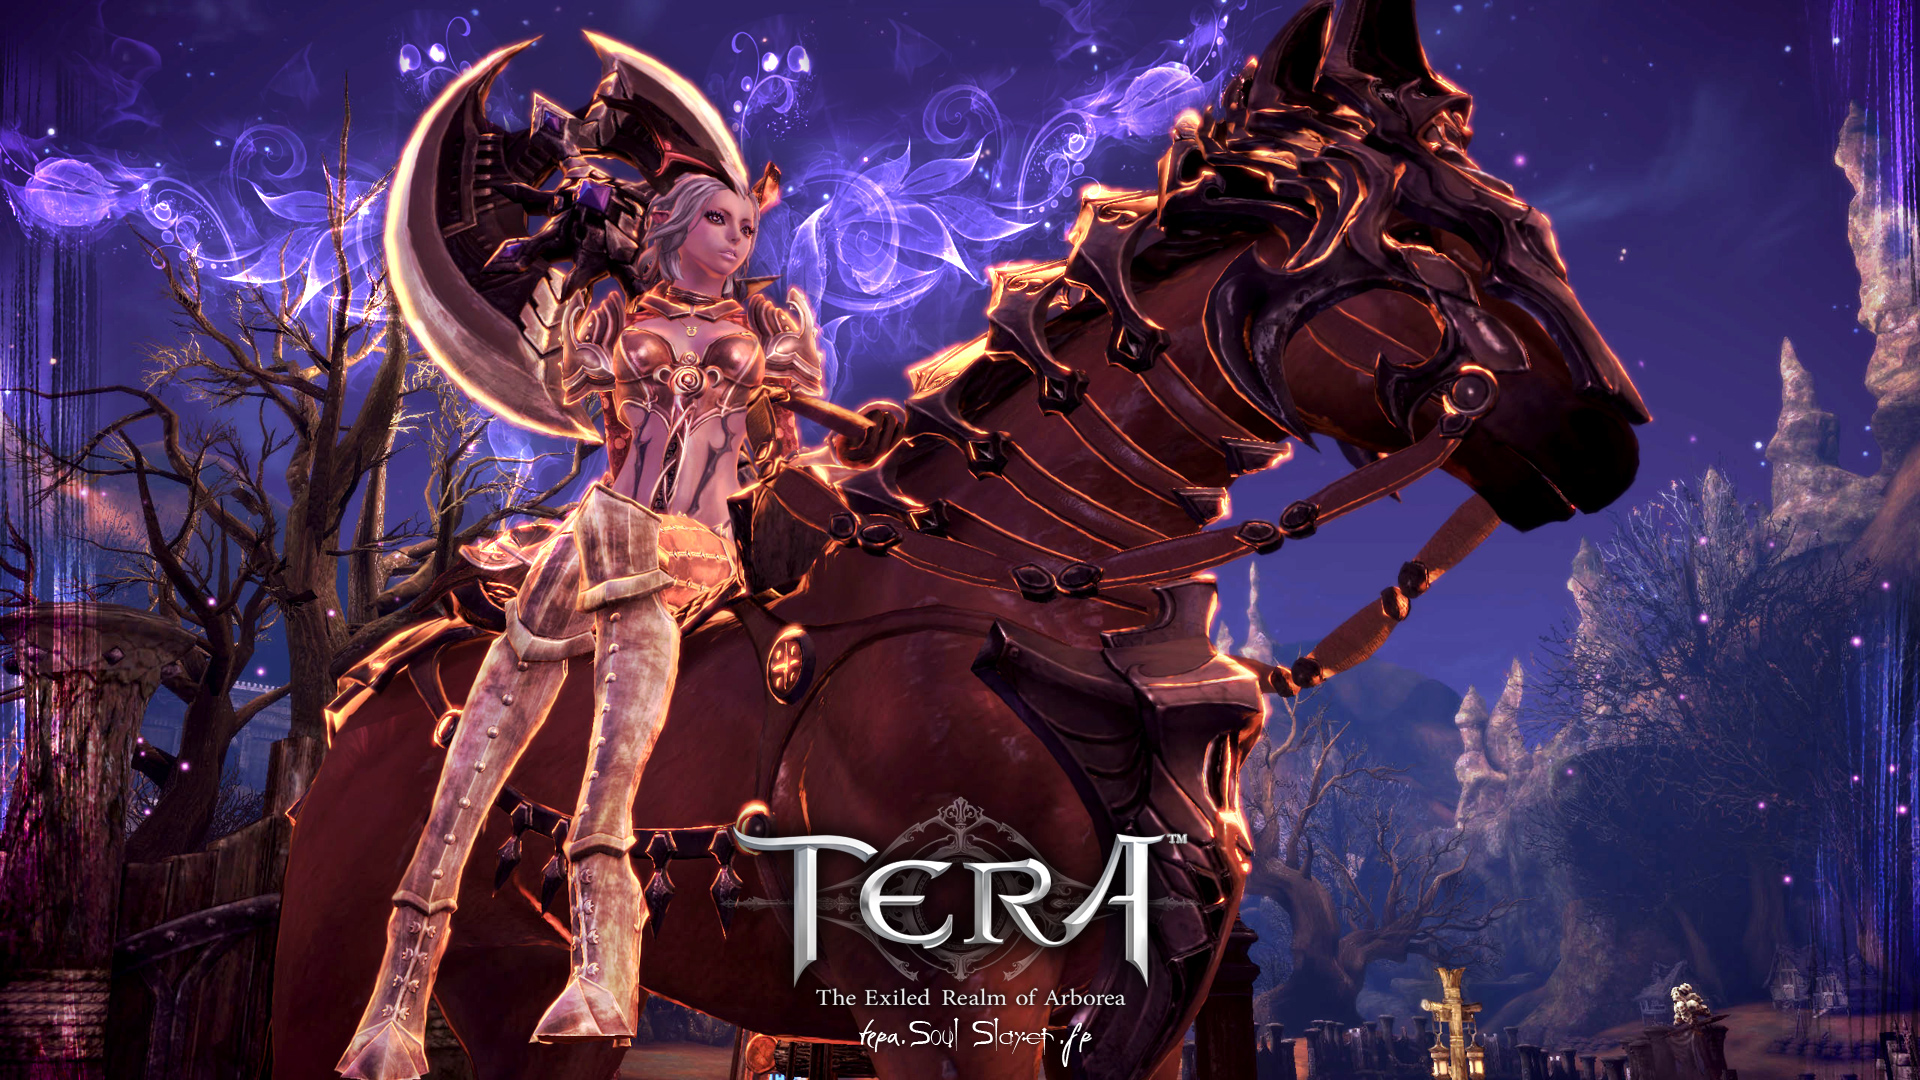  the other wallpapers of Tera You are downloading Tera wallpaper 25